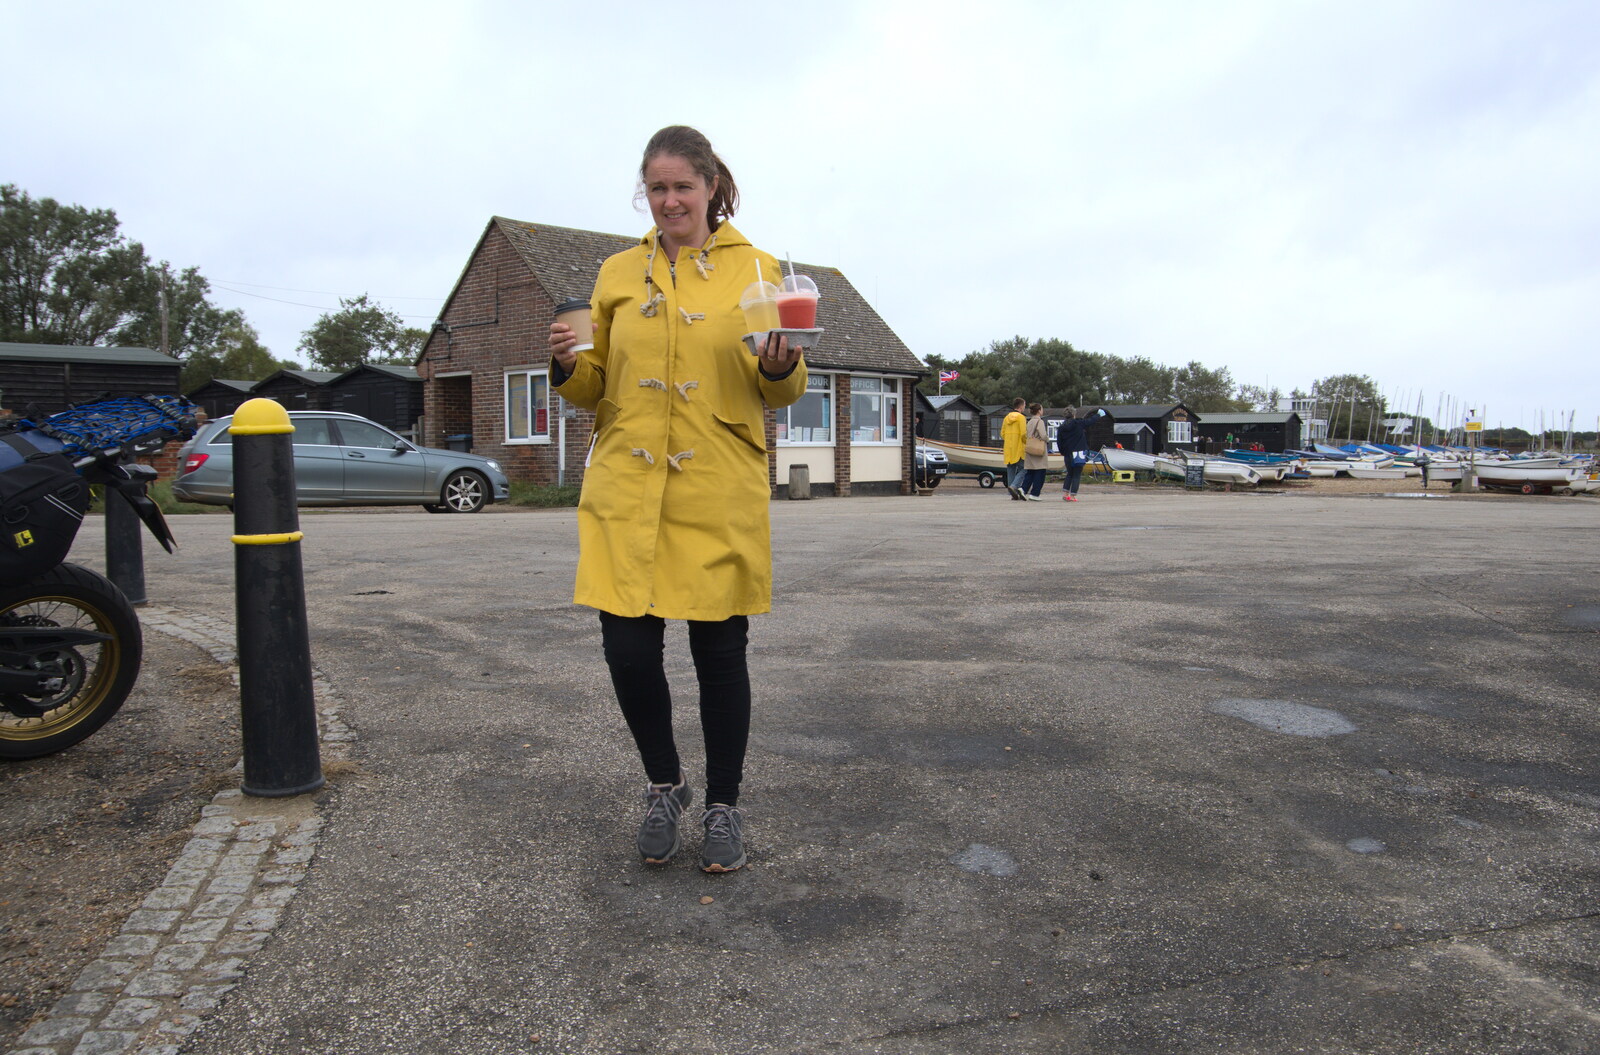 Isobel gets back with some smoothies from A Trip to Orford, Suffolk - 29th August 2020